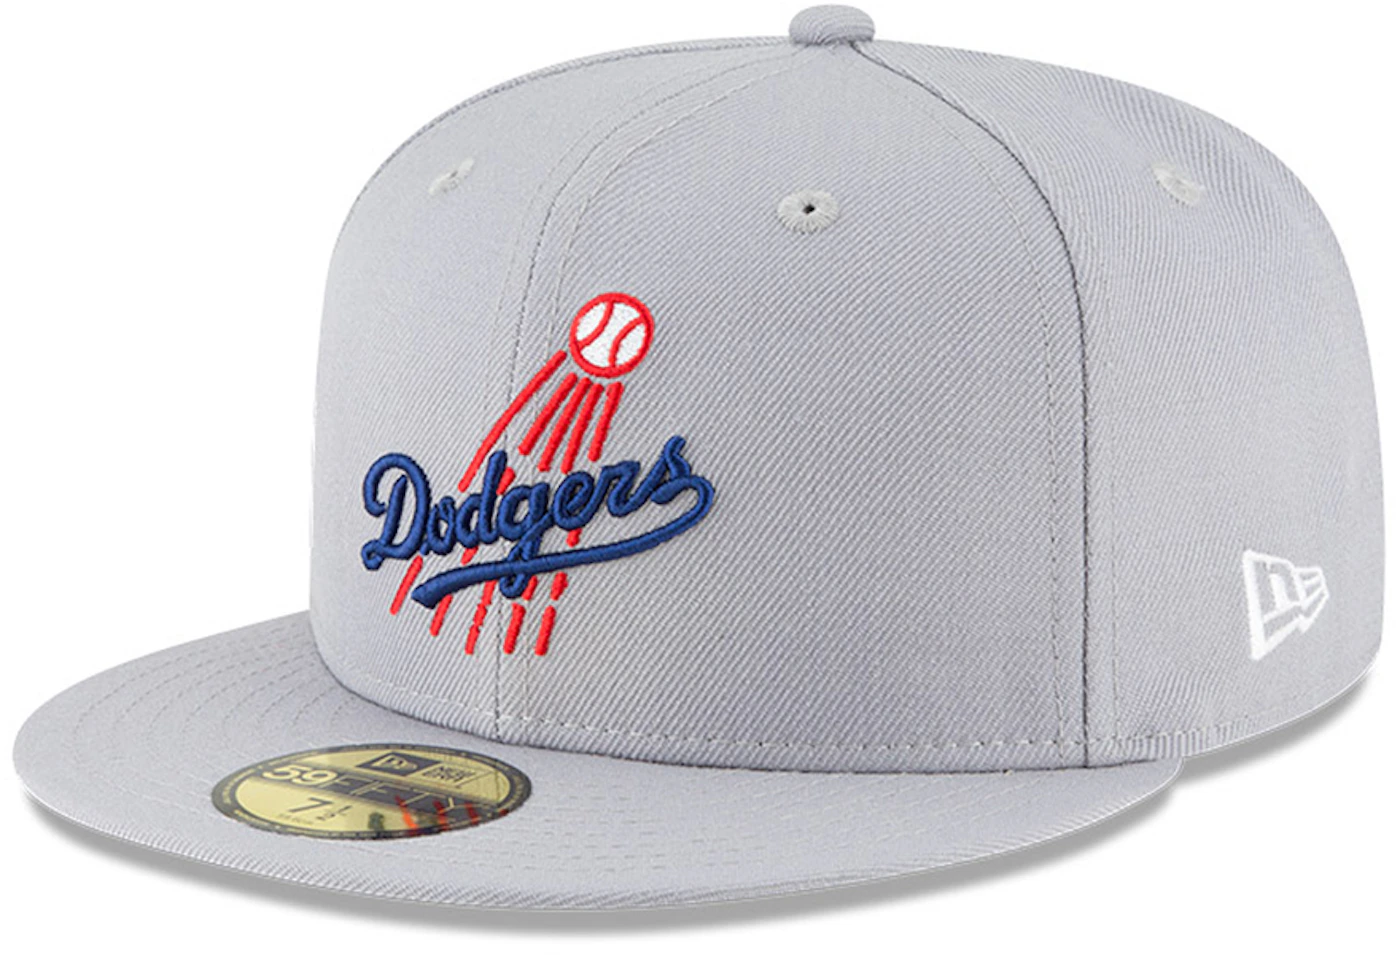 Men's Mitchell & Ness White Los Angeles Dodgers Cooperstown